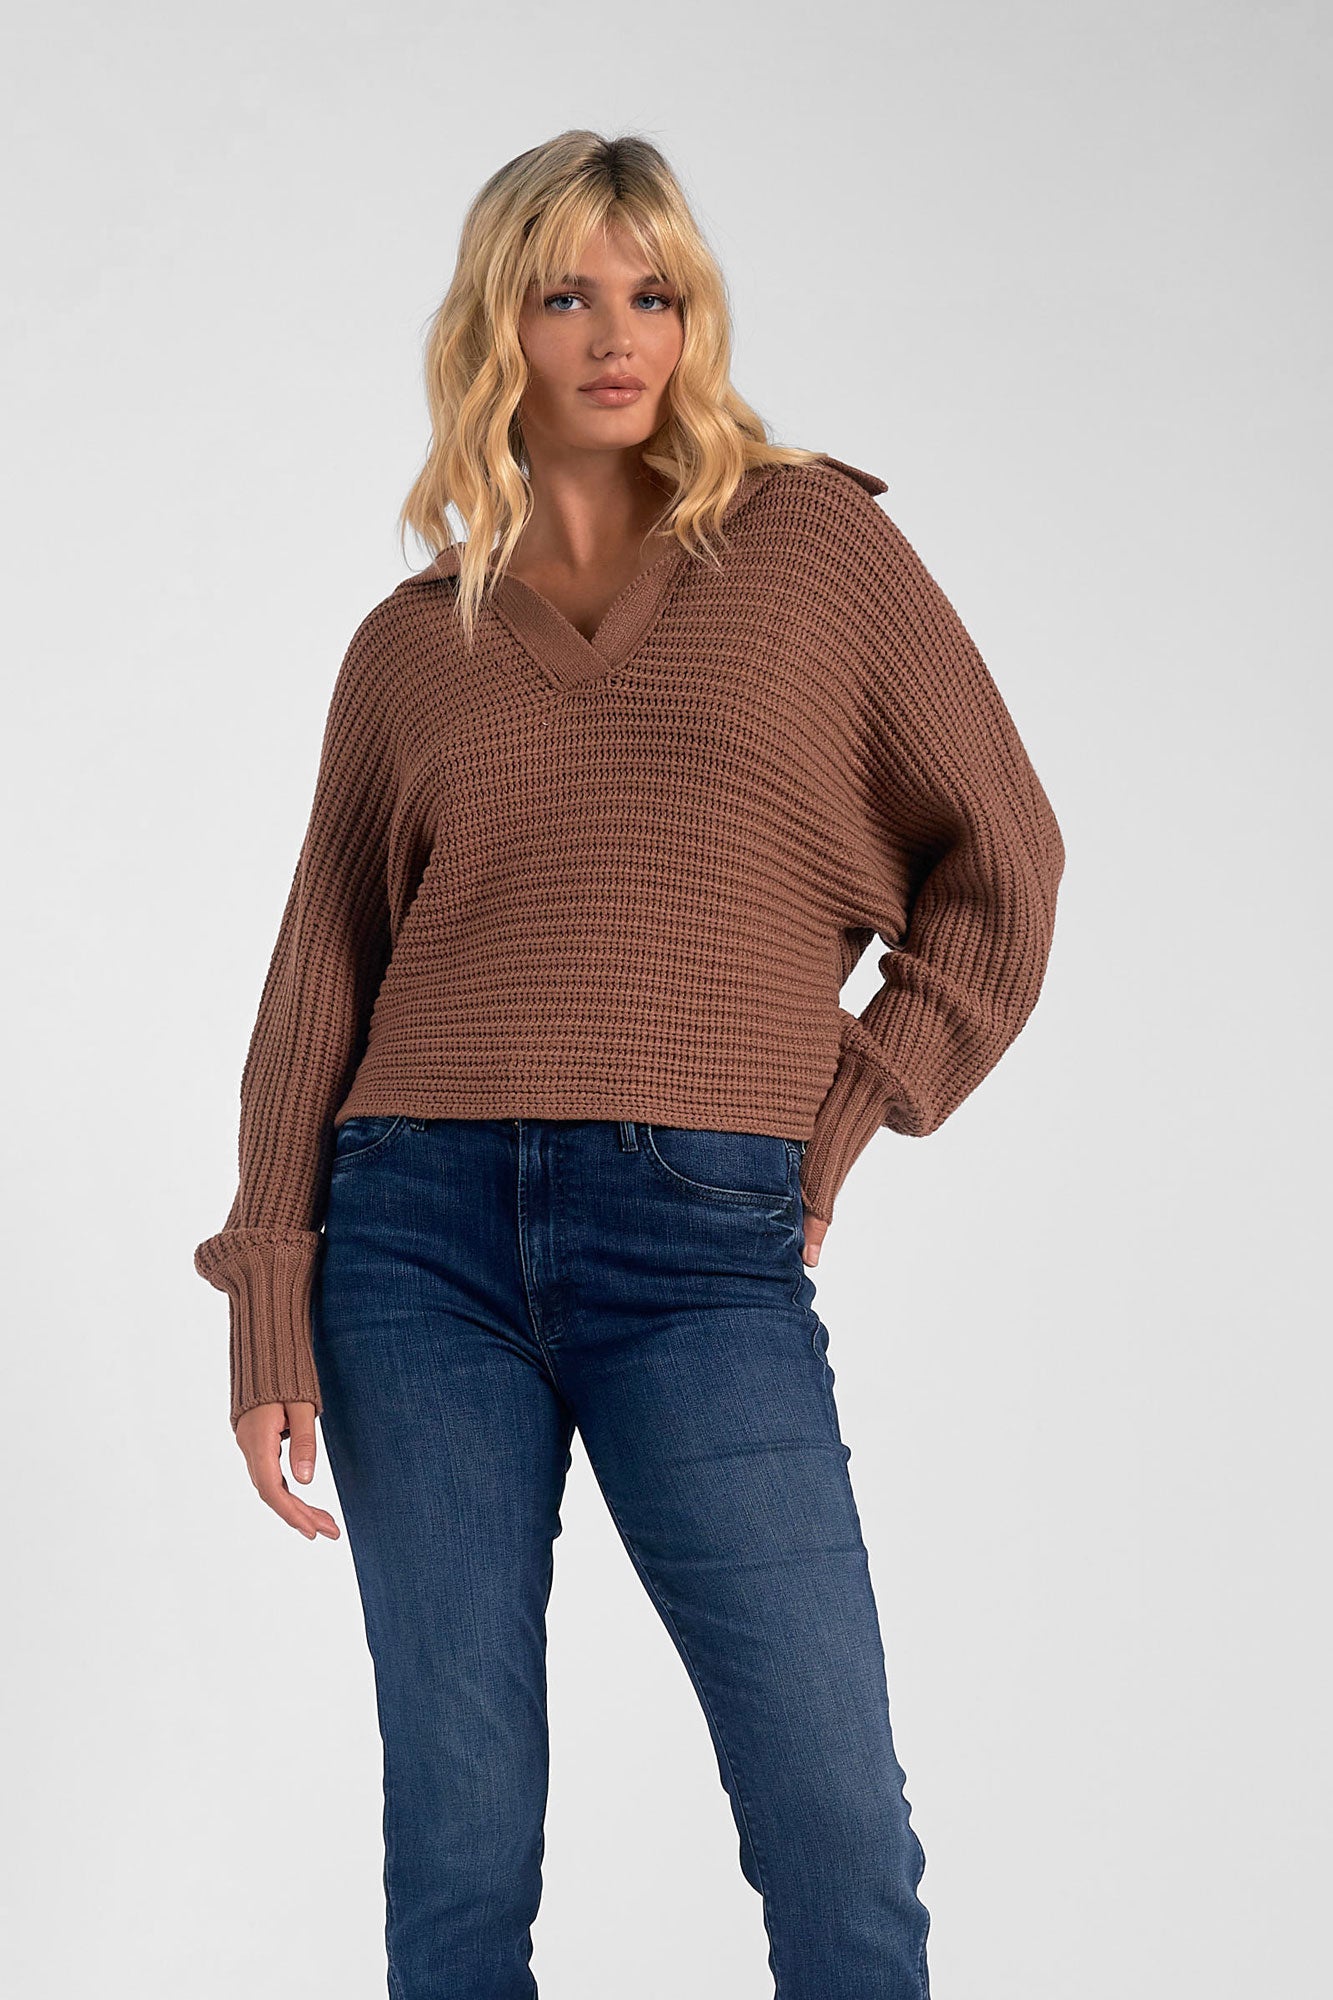 Chic Brown Collar Sweater